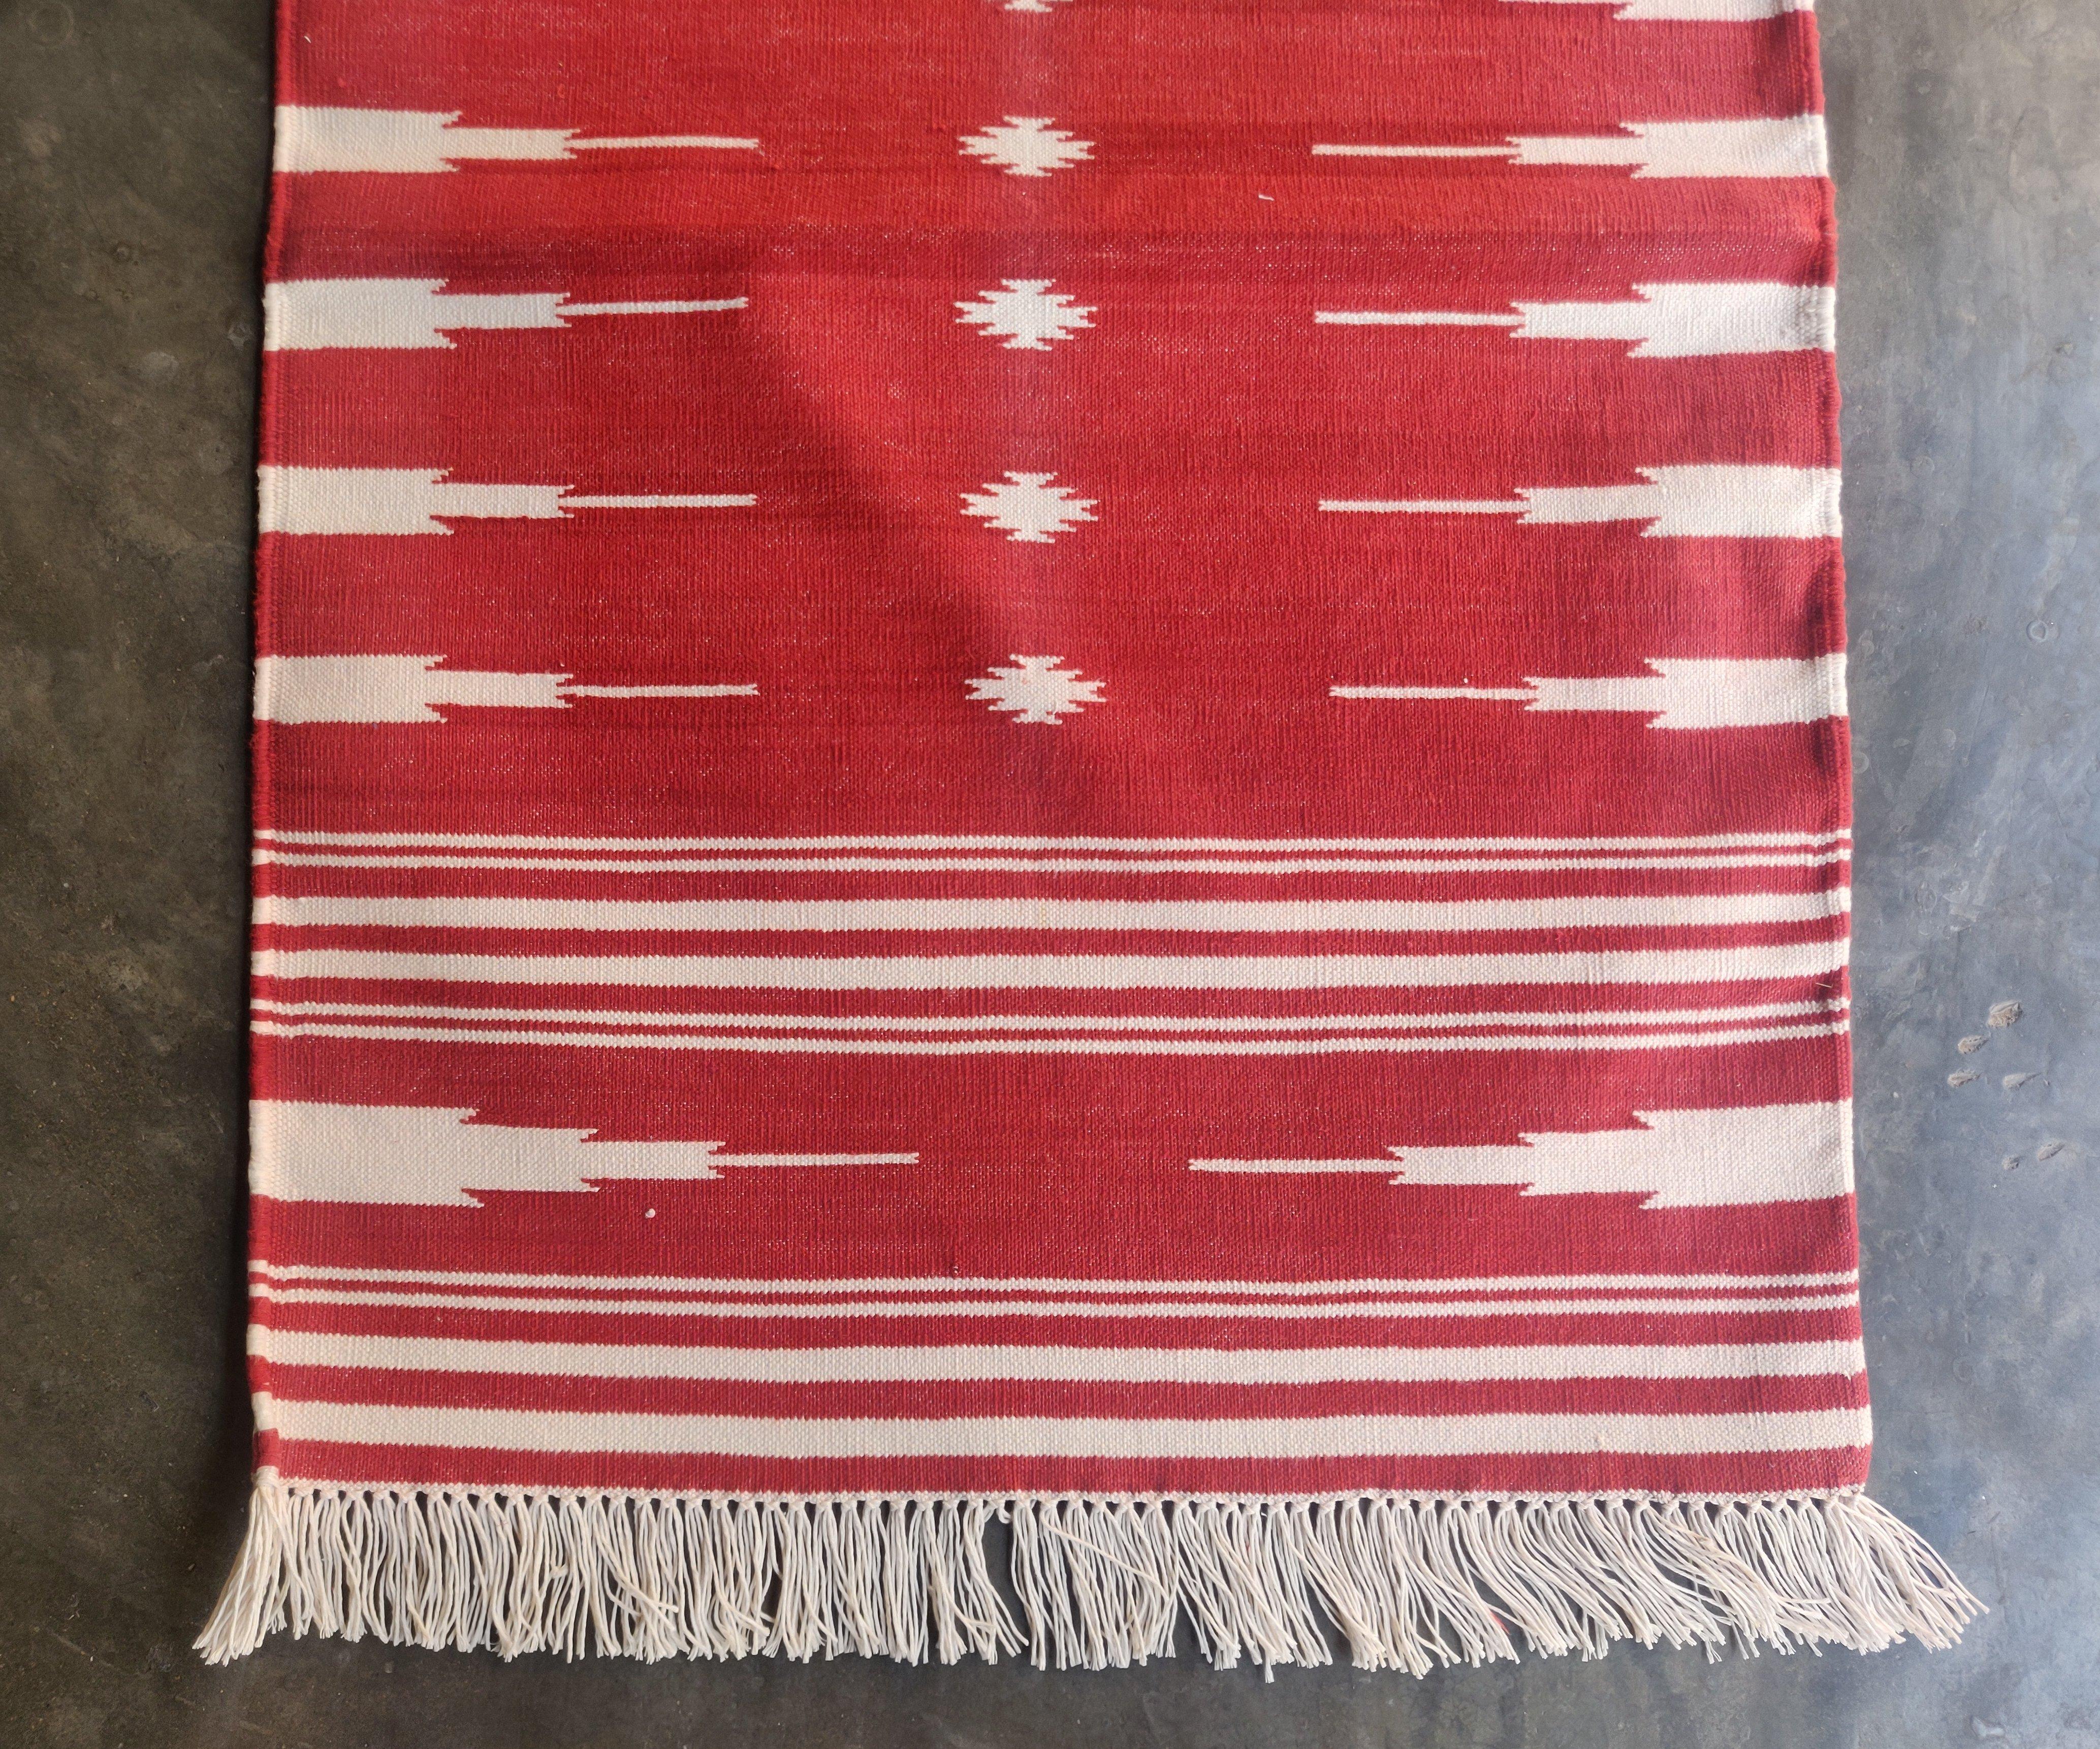 Hand-Woven Handmade Cotton Area Flat Weave Rug, 2x3 Red And White Striped Indian Dhurrie For Sale